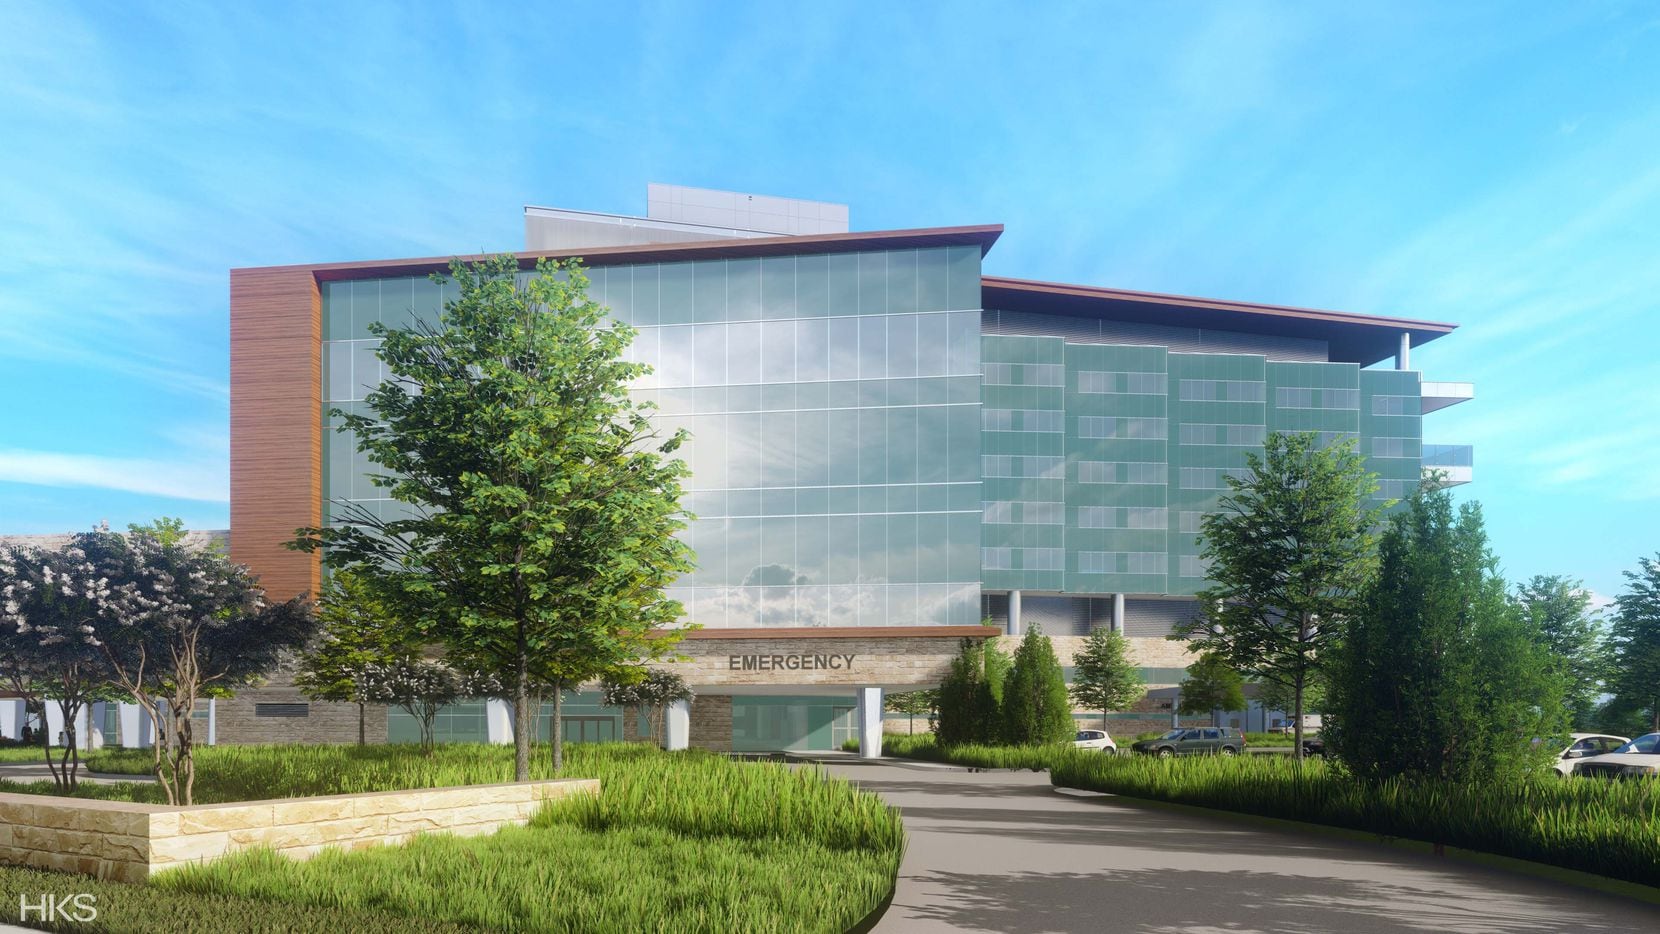 The Children's Medical Center Plano will expand by 300,000 square feet with the addition of a new tower.